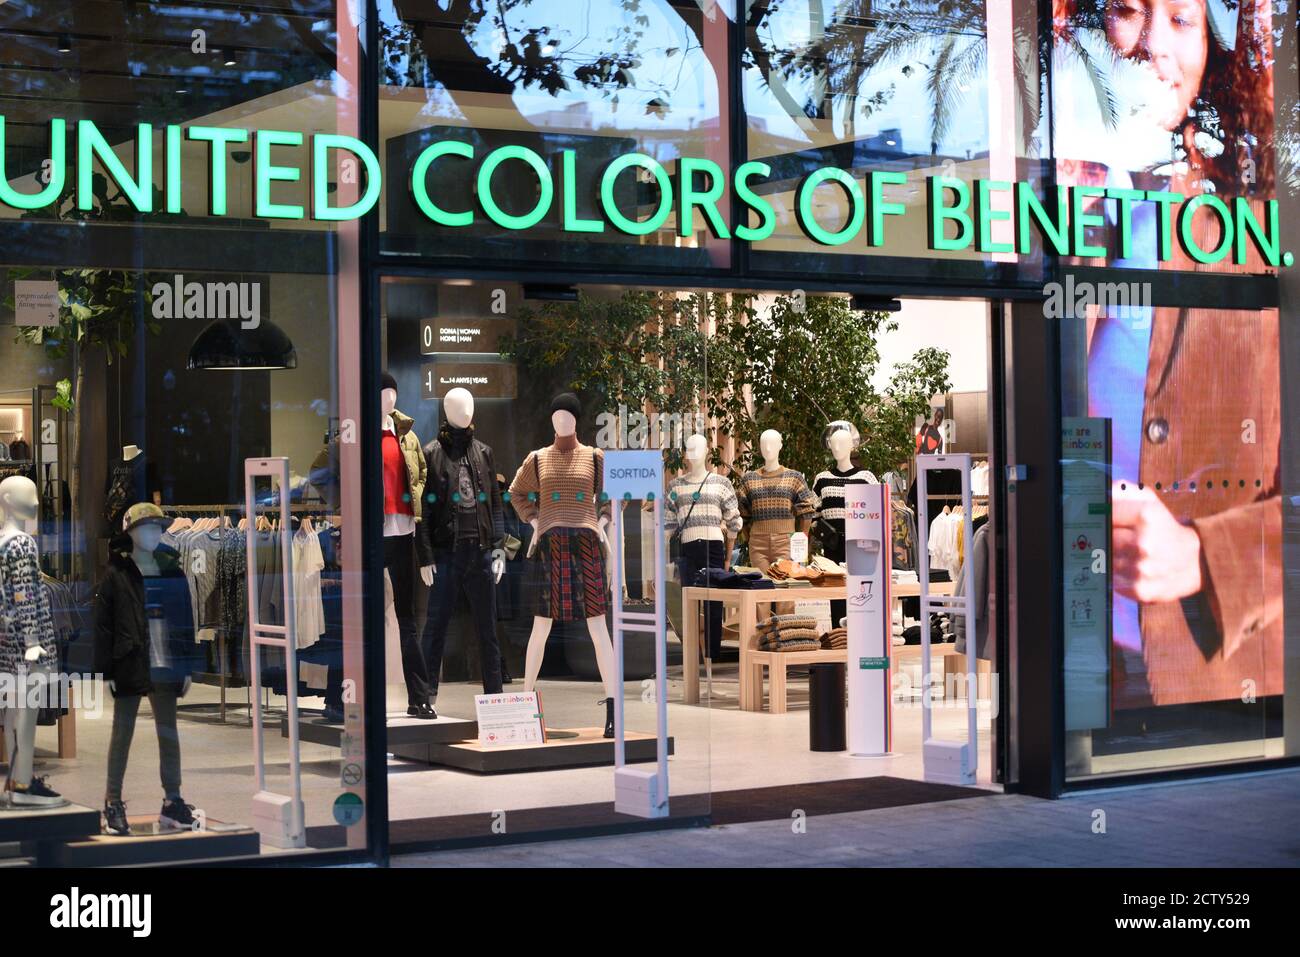 The United Colors of Benetton logo seen at one of their stores Stock Photo  - Alamy